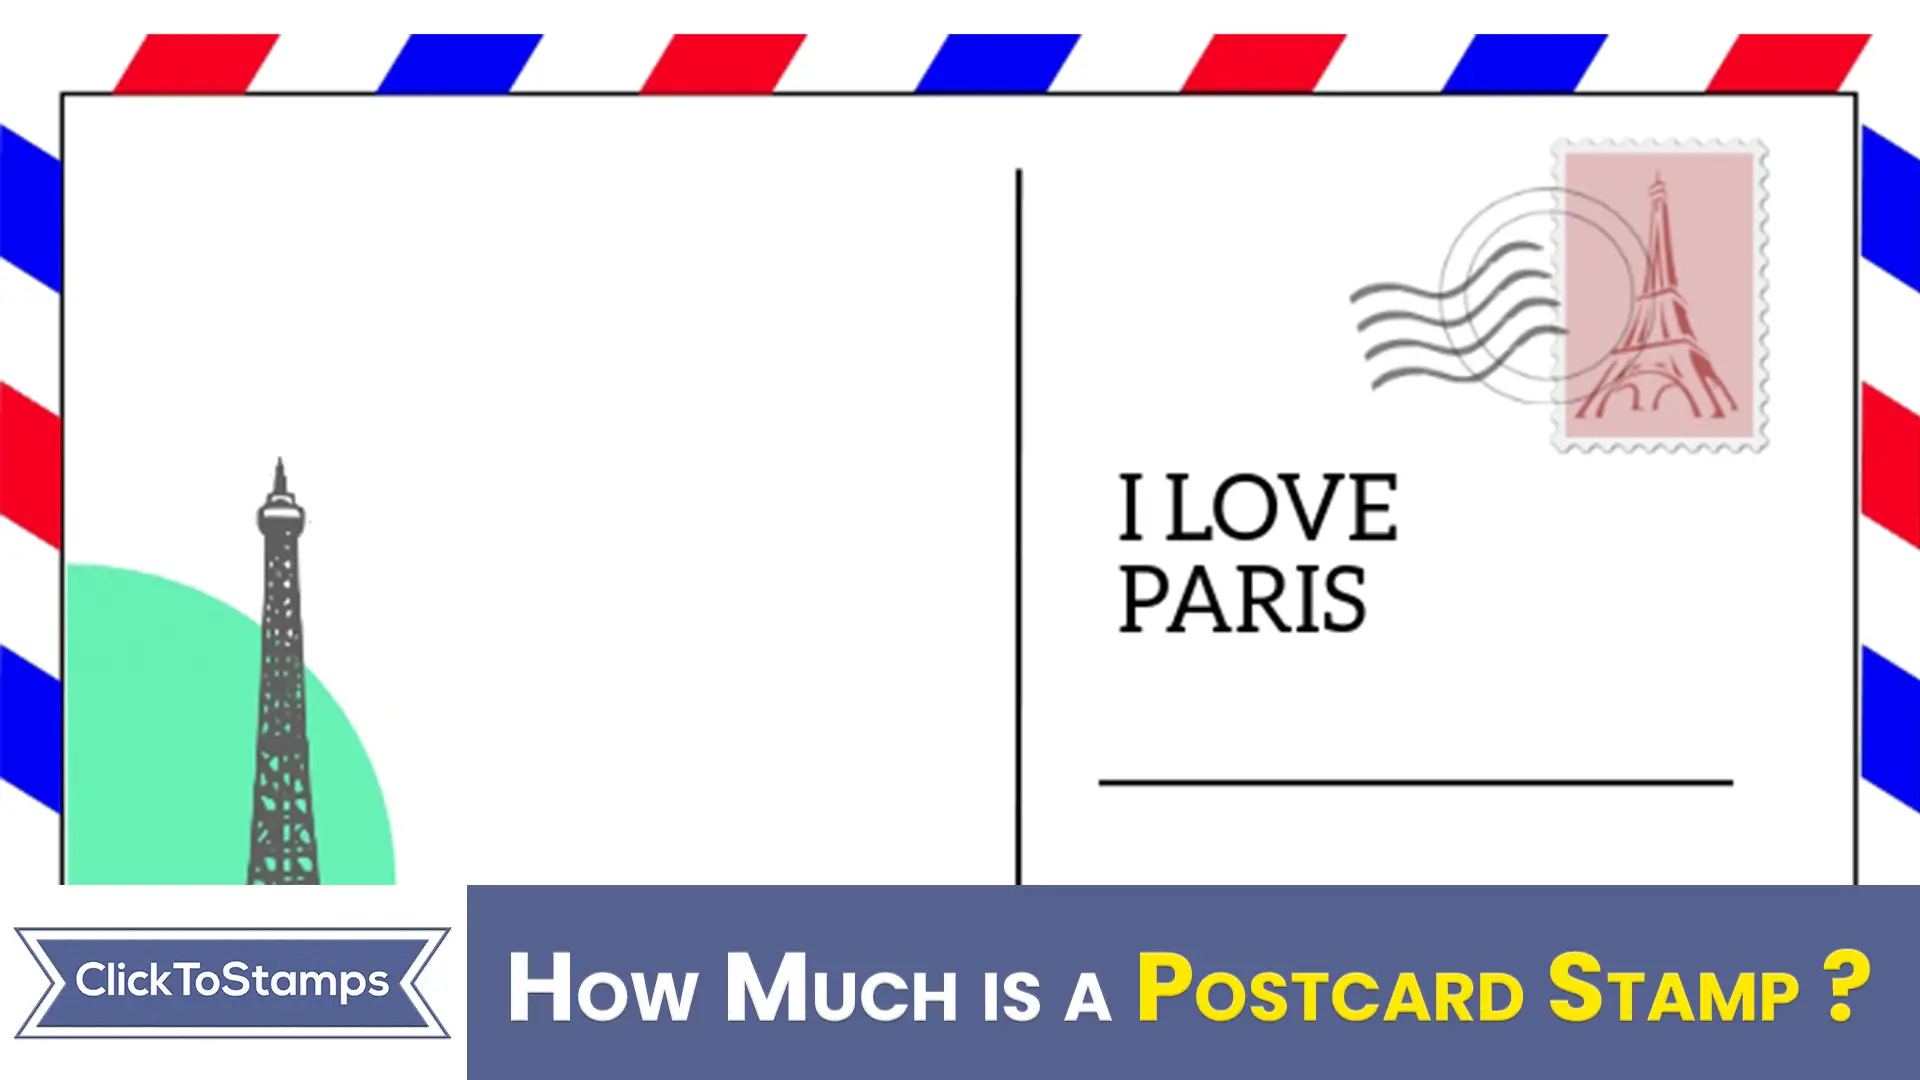 How much is a postcard stamp